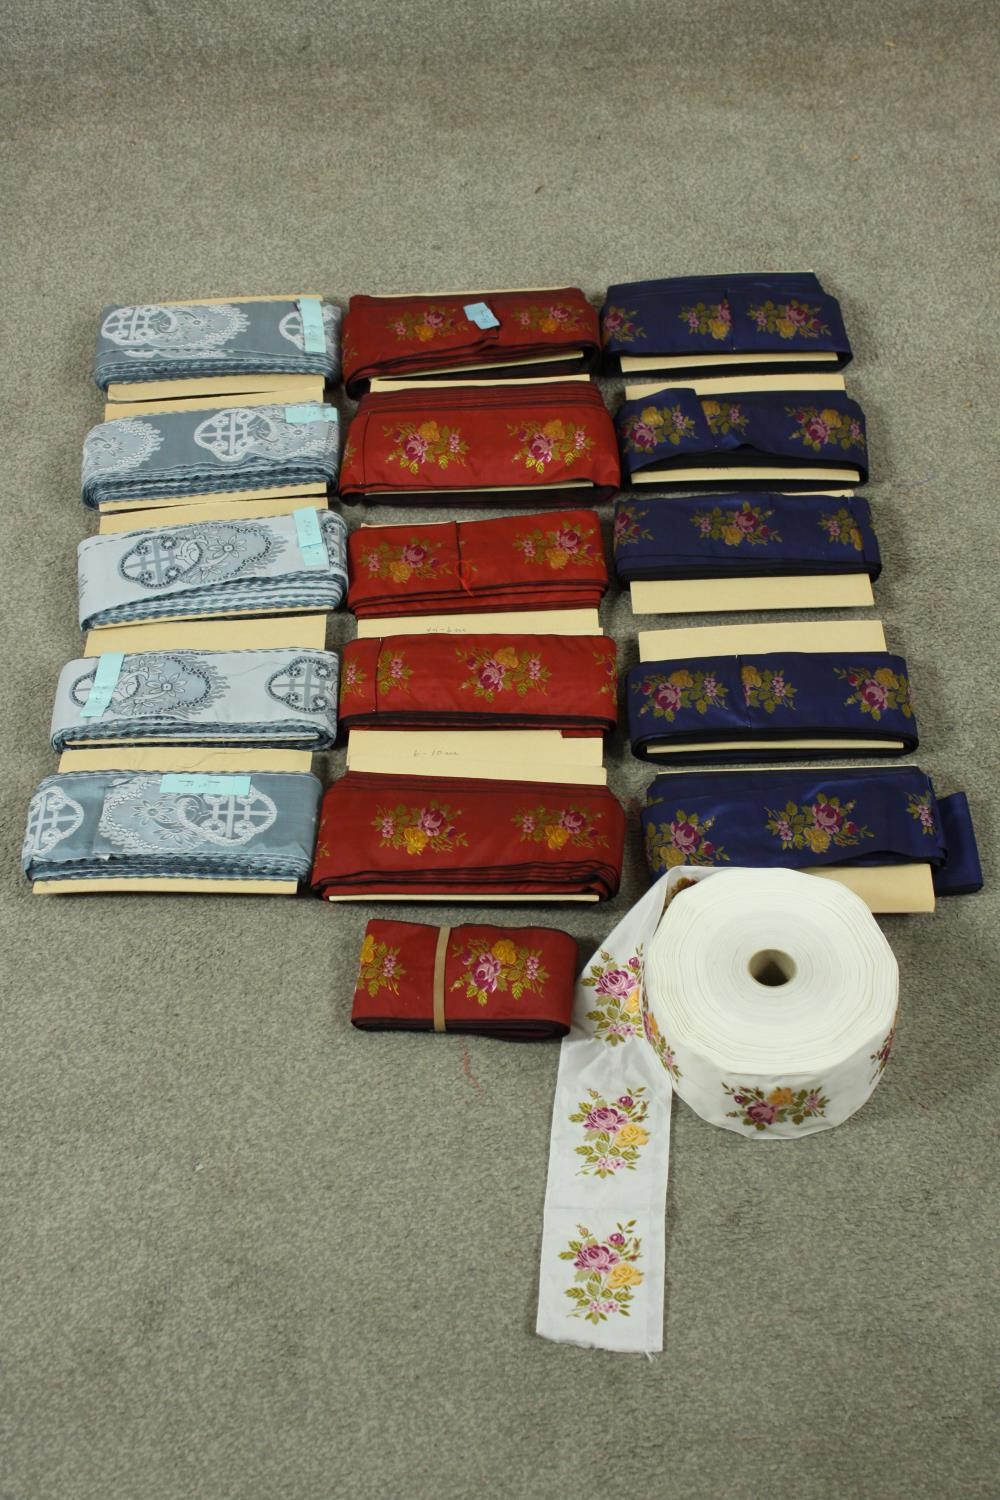 Assorted Danish embroidered silk ribbons and strips of fabric